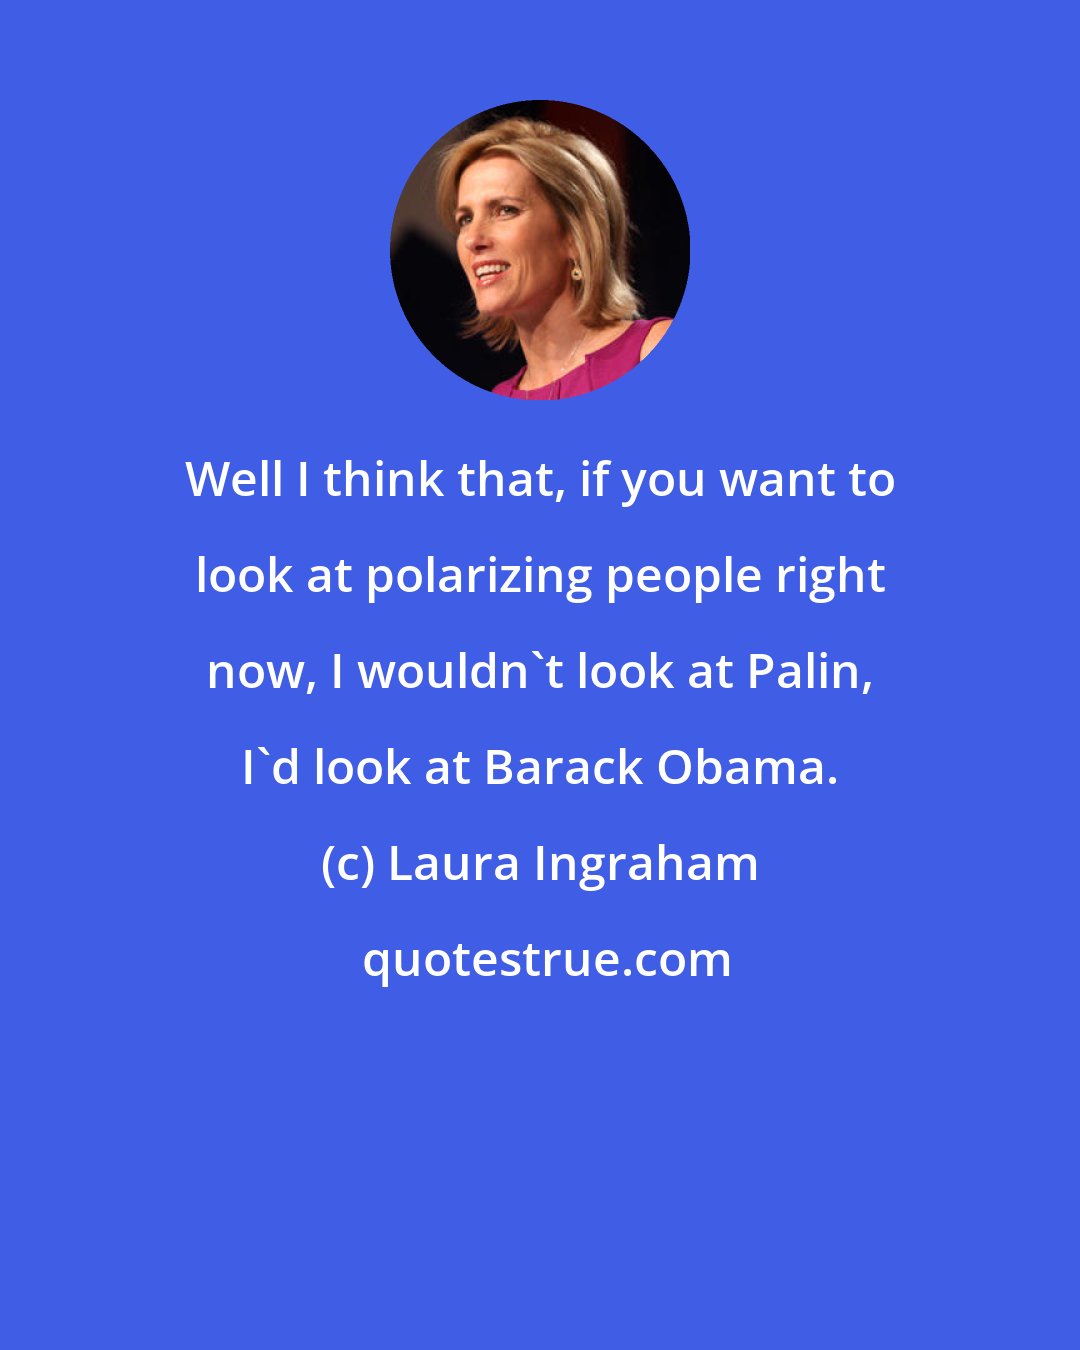 Laura Ingraham: Well I think that, if you want to look at polarizing people right now, I wouldn't look at Palin, I'd look at Barack Obama.